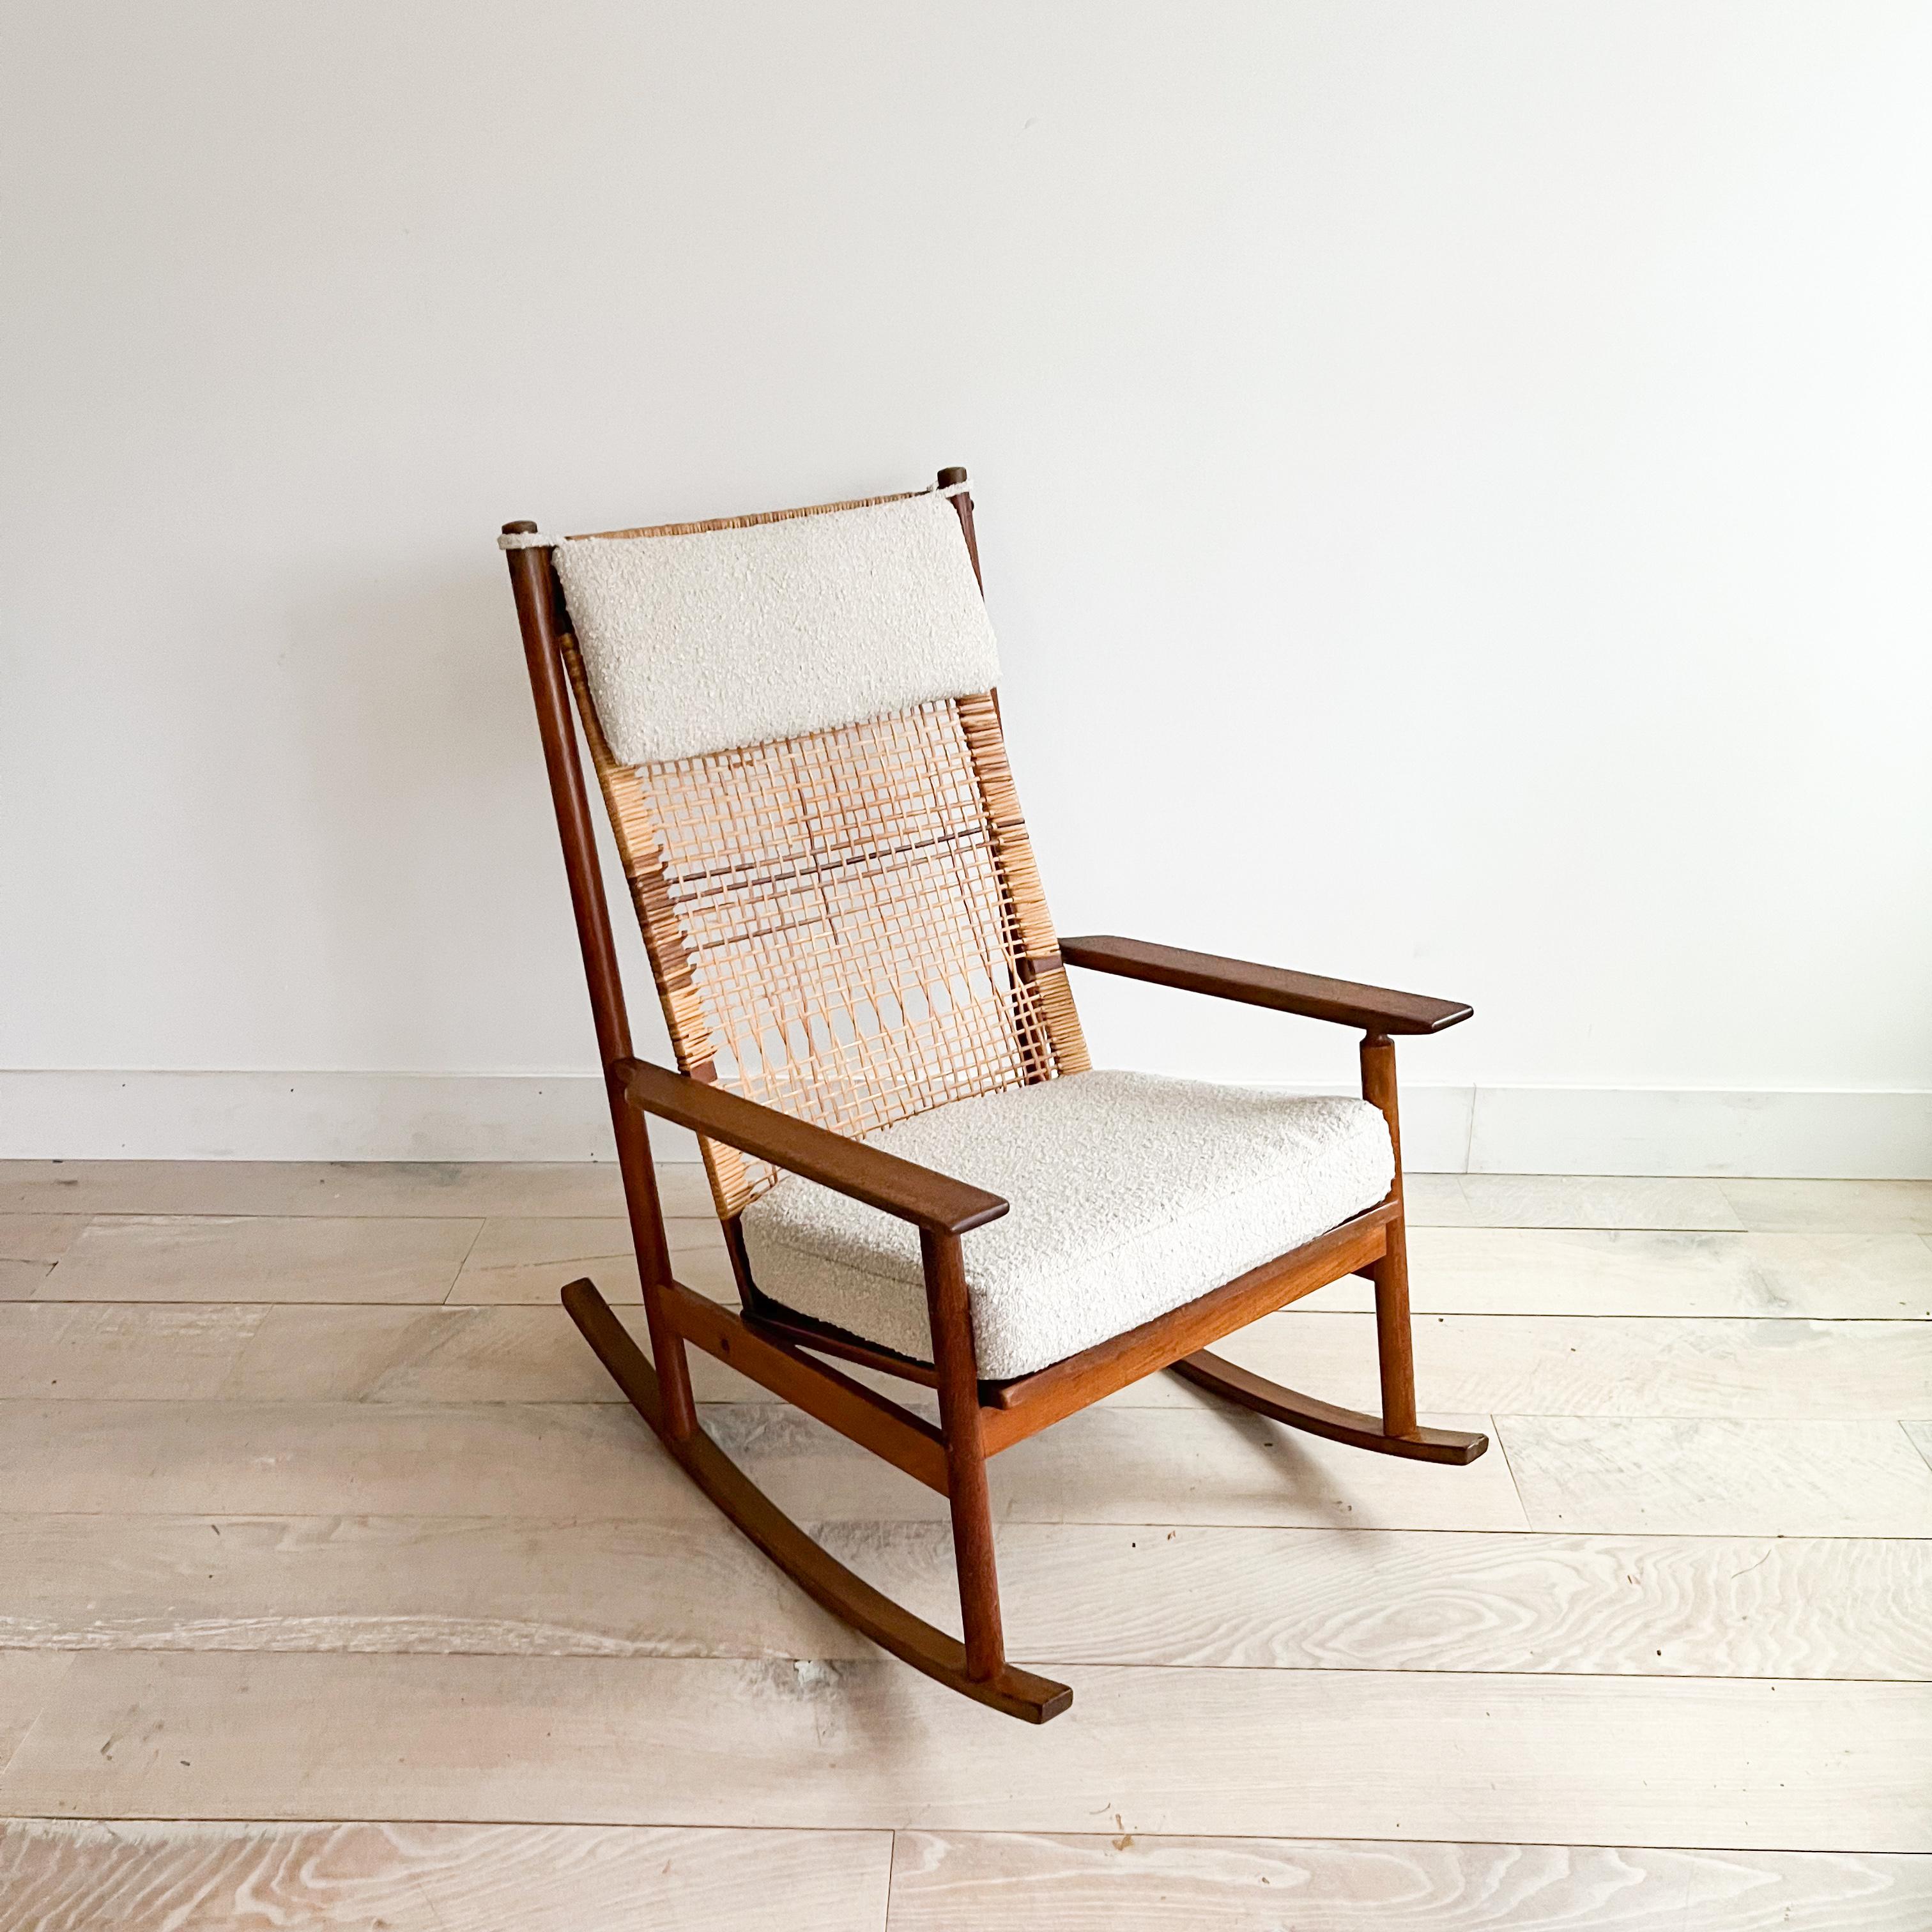 Presenting an exquisite mid-century modern rocking chair designed by the iconic Hans Olsen for Dux. Crafted with precision, this teak and woven cane rocking chair is a testament to timeless design and exceptional craftsmanship.

Stamped for